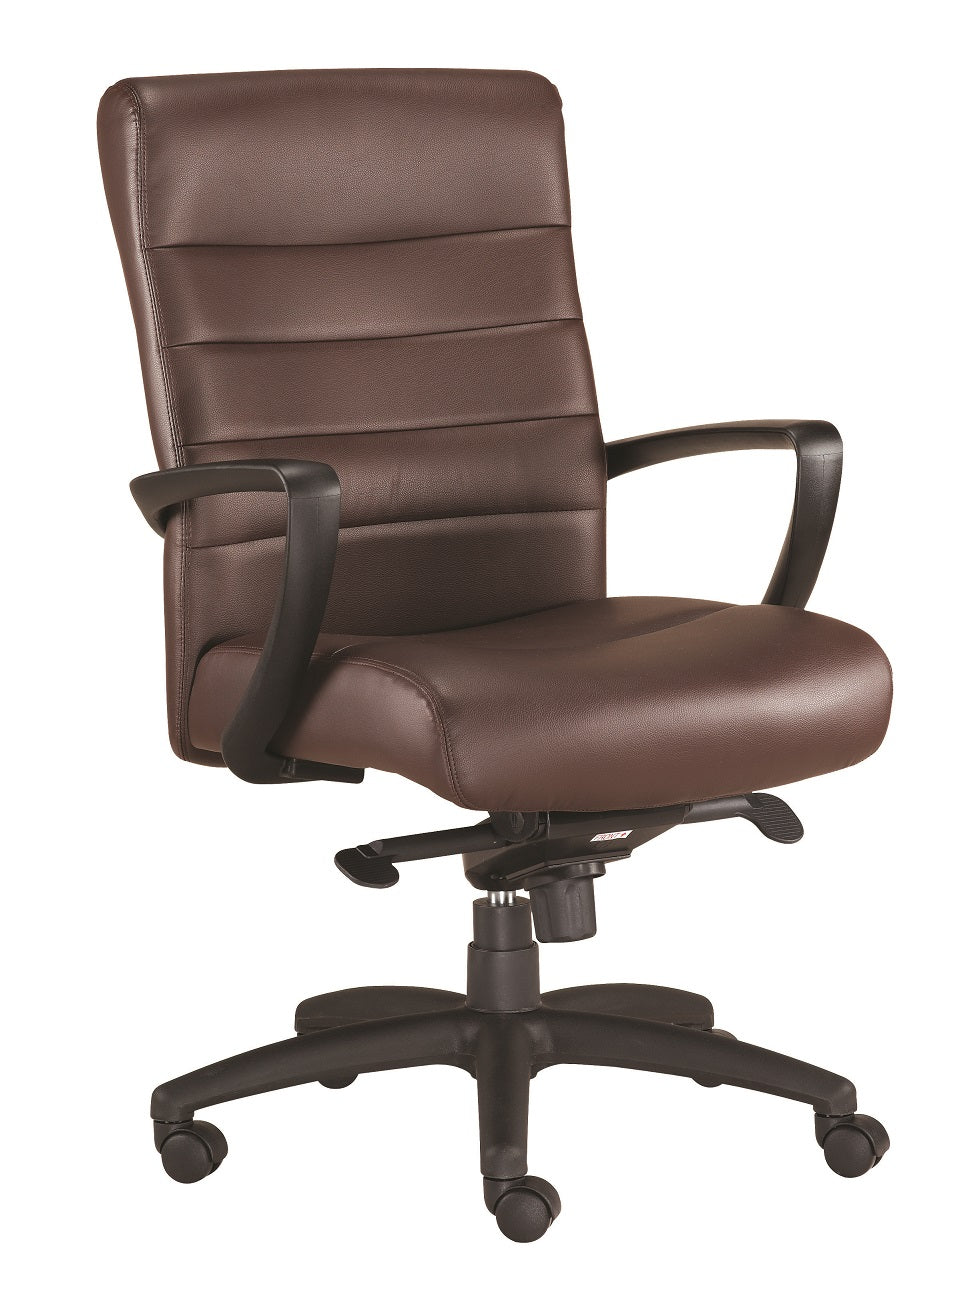 Brown Faux Leather Tufted Seat Swivel Adjustable Task Chair Leather Back Plastic Frame - 99fab 